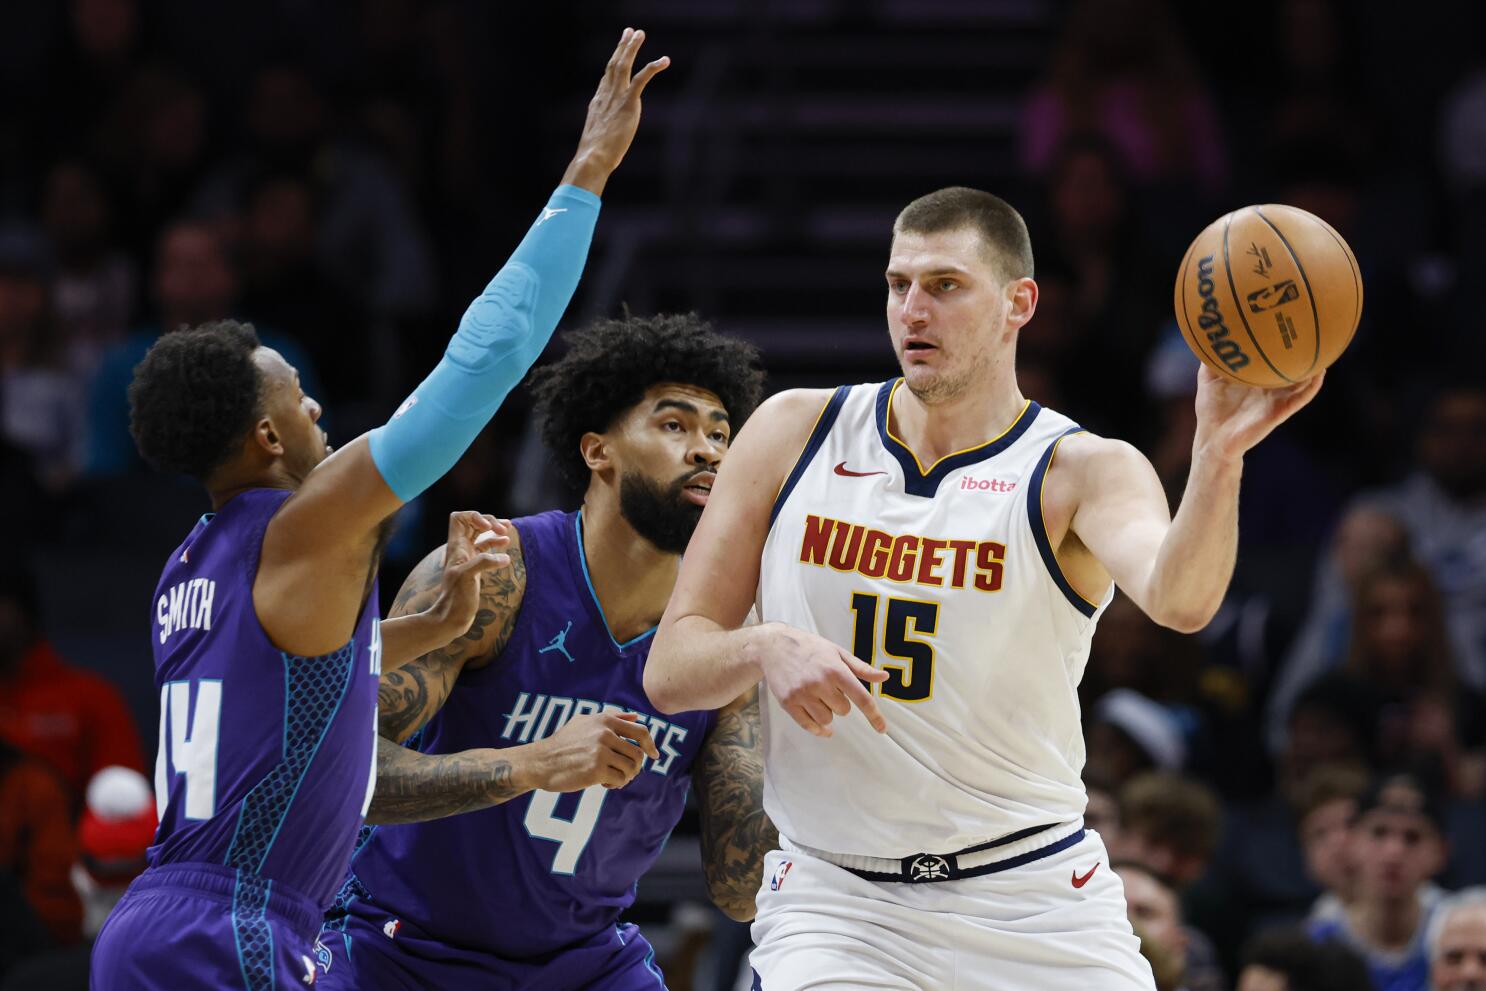 No. 2 overall pick Brandon Miller ruled out for Hornets after injuring  ankle vs Nuggets - The San Diego Union-Tribune